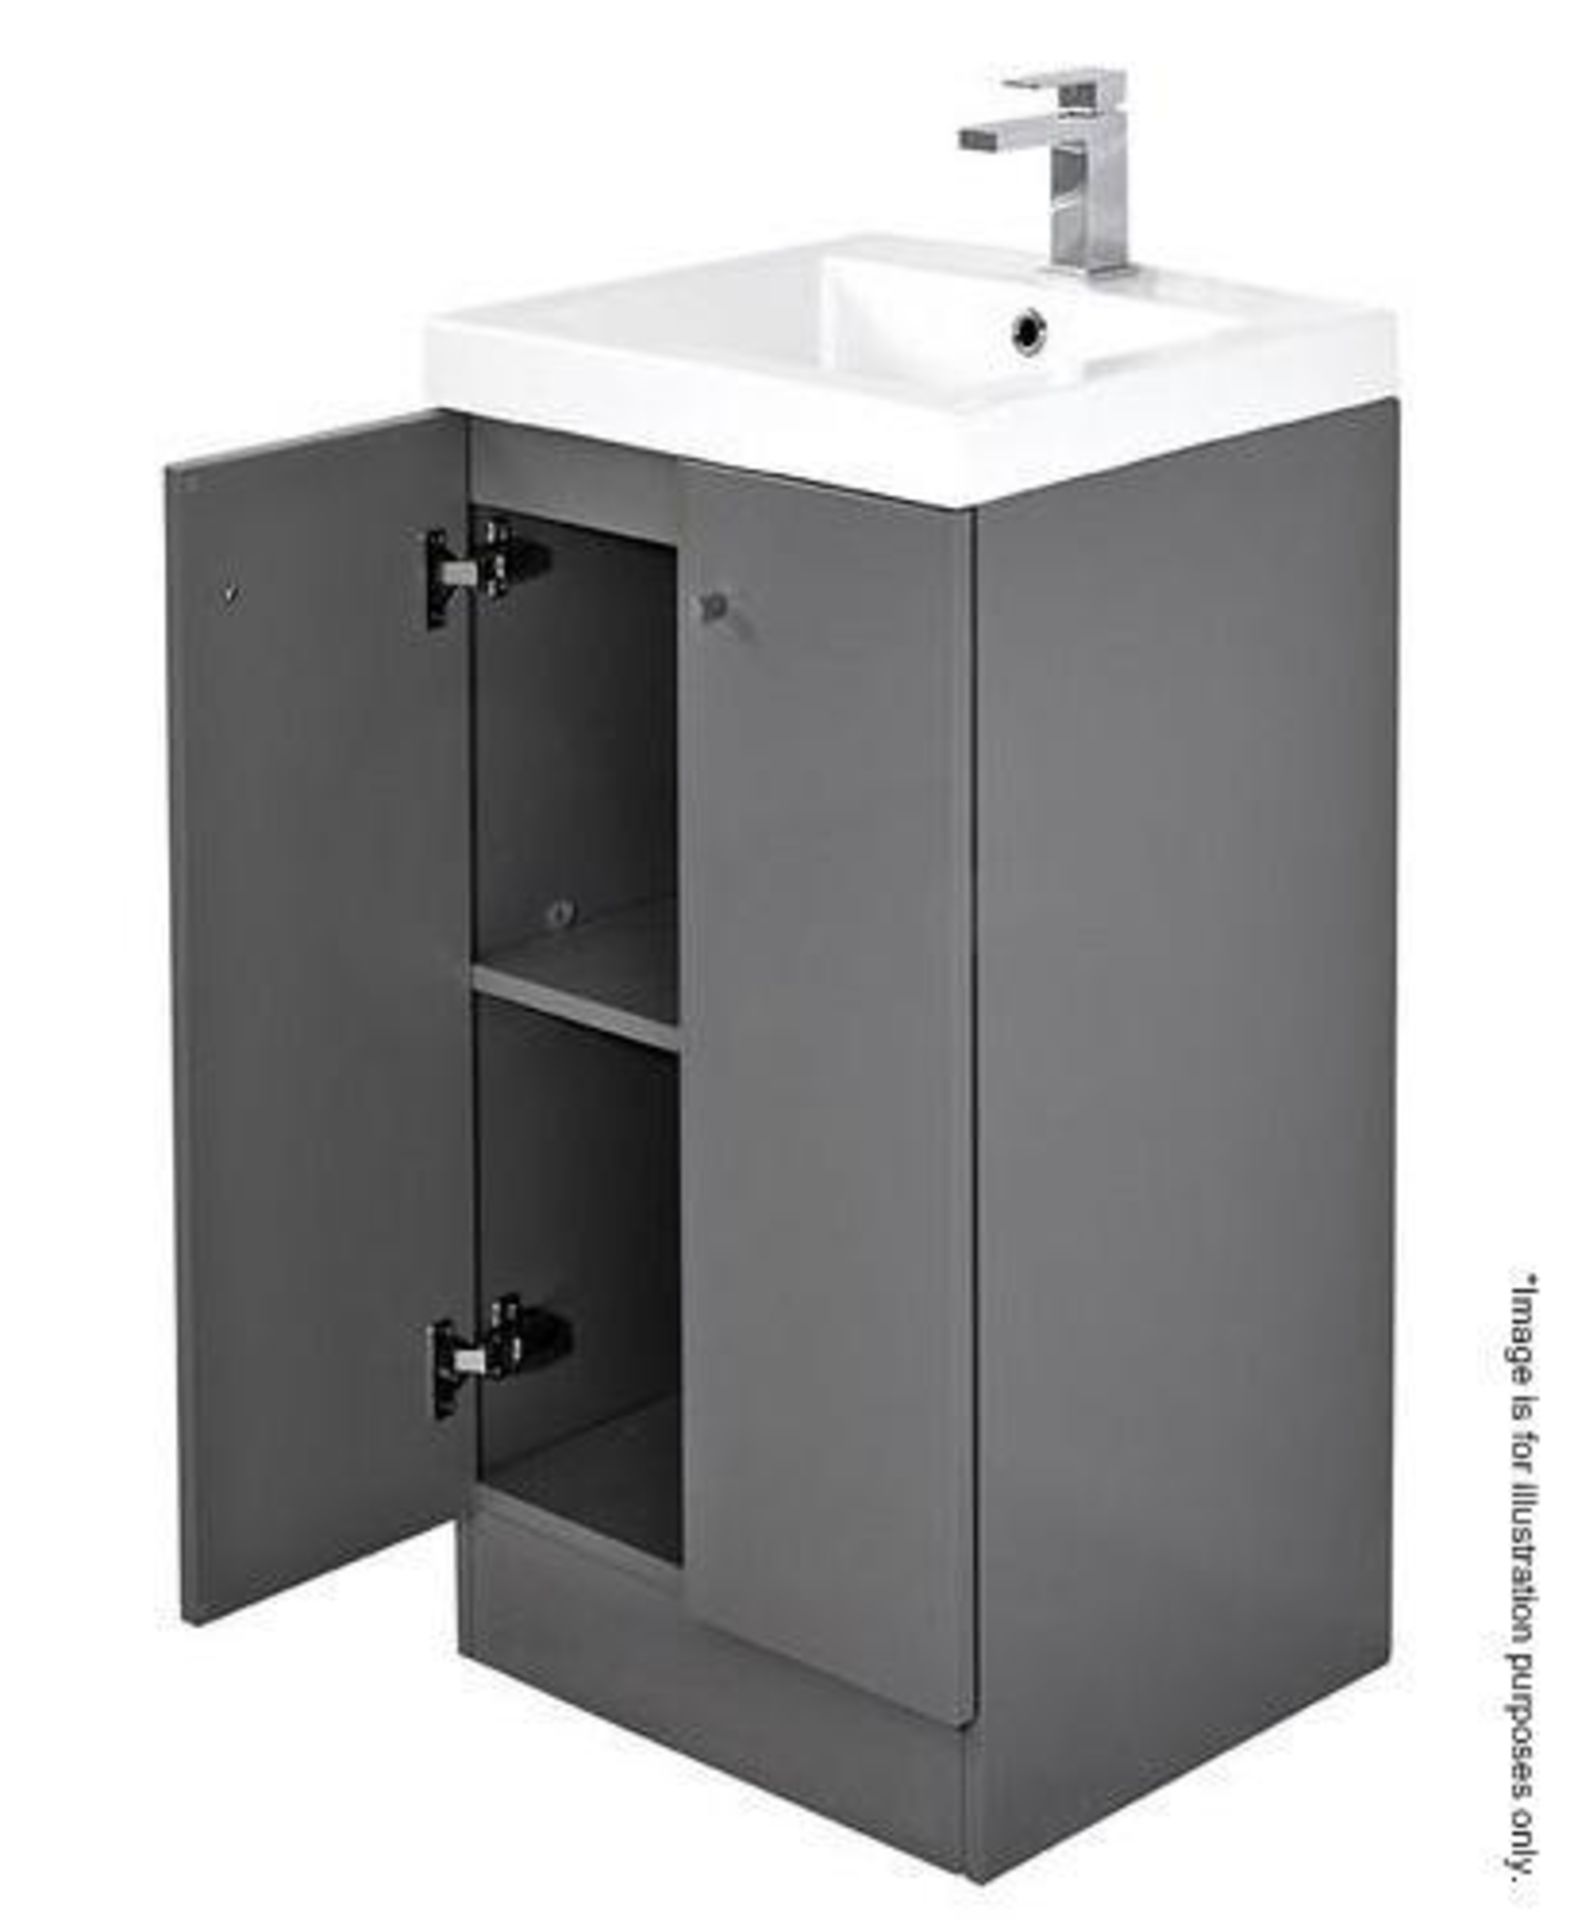 7 x Alpine Duo 400 Floorstanding Vanity Units In Gloss Grey - Brand New Boxed Stock - Dimensions: H8 - Image 3 of 3